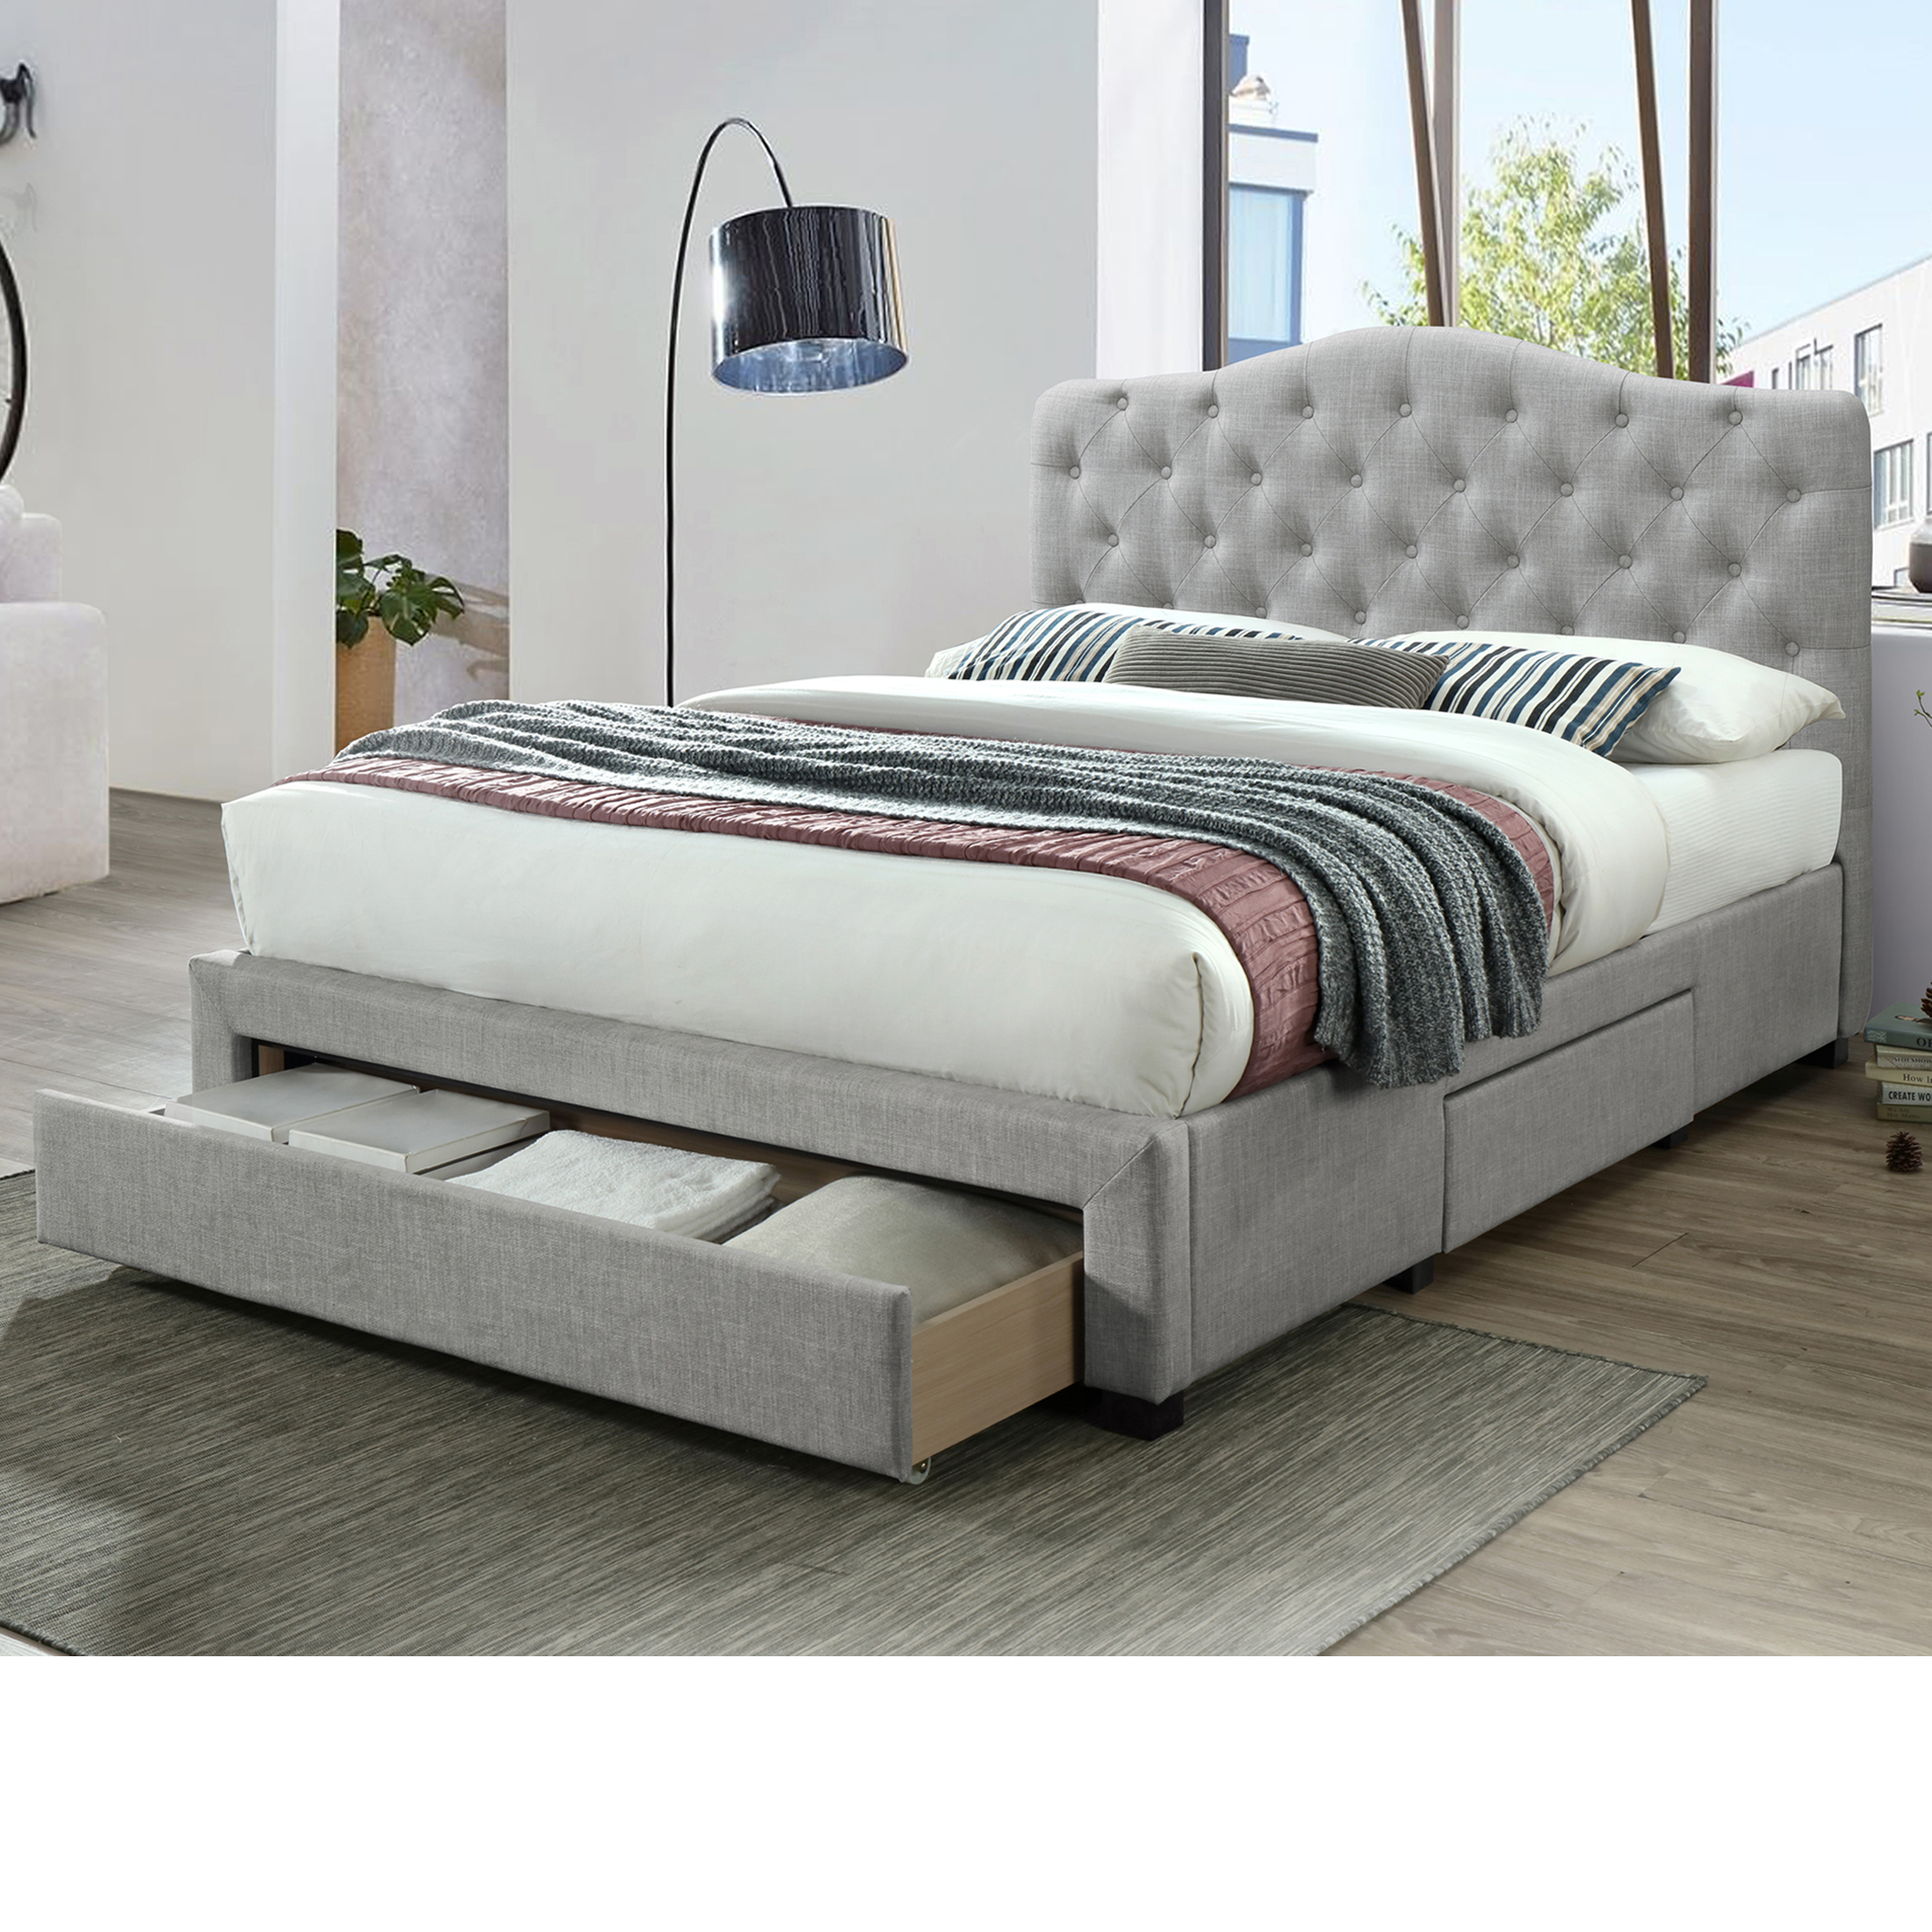 10 Best Upholstered Bed Designs With Trending Photos - vrogue.co